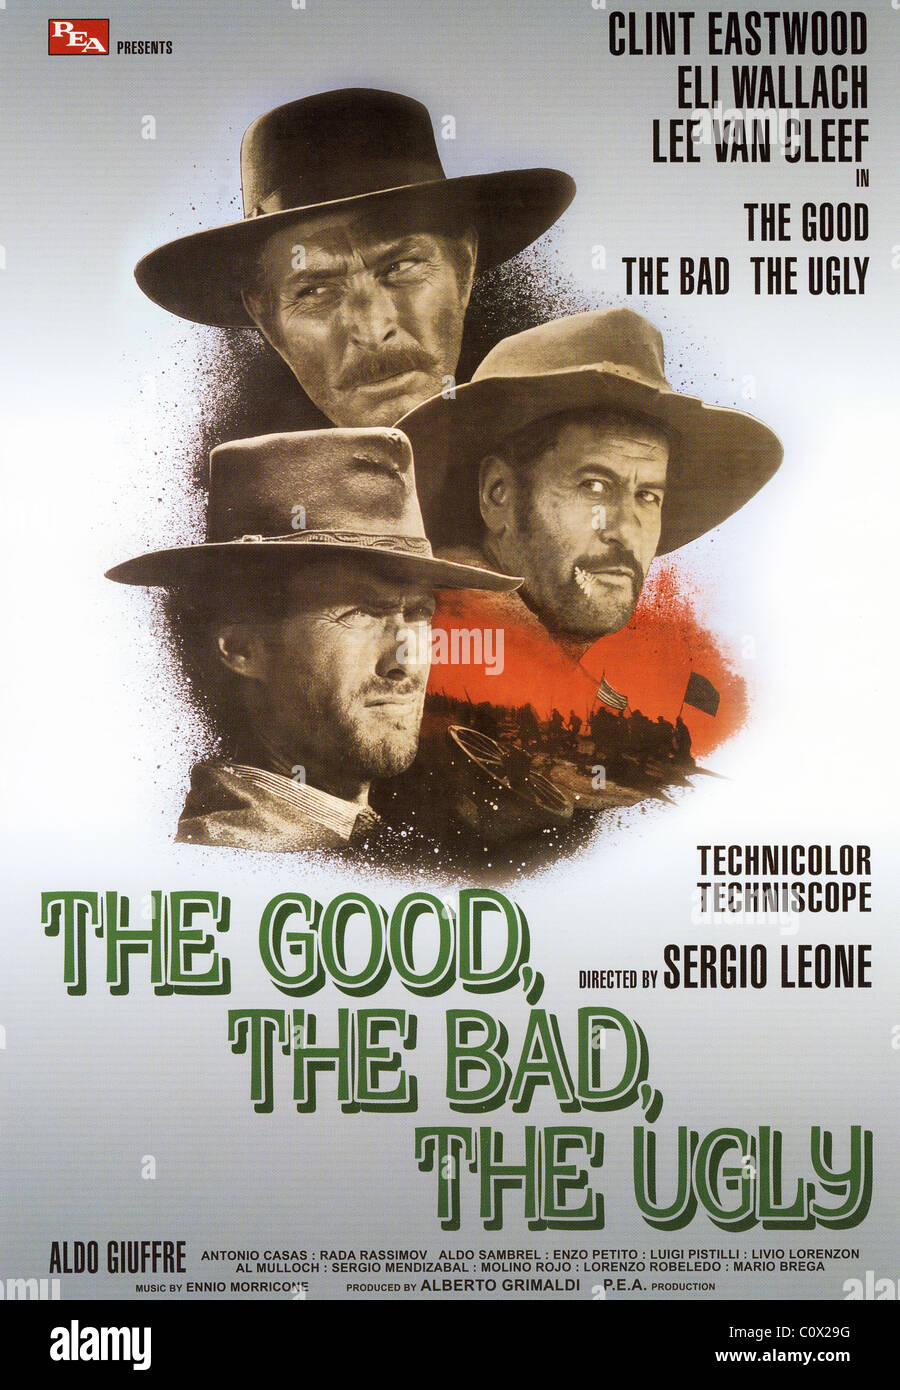 Clint Eastwood THE GOOD, THE BAD AND THE UGLY movie japan 8mm video